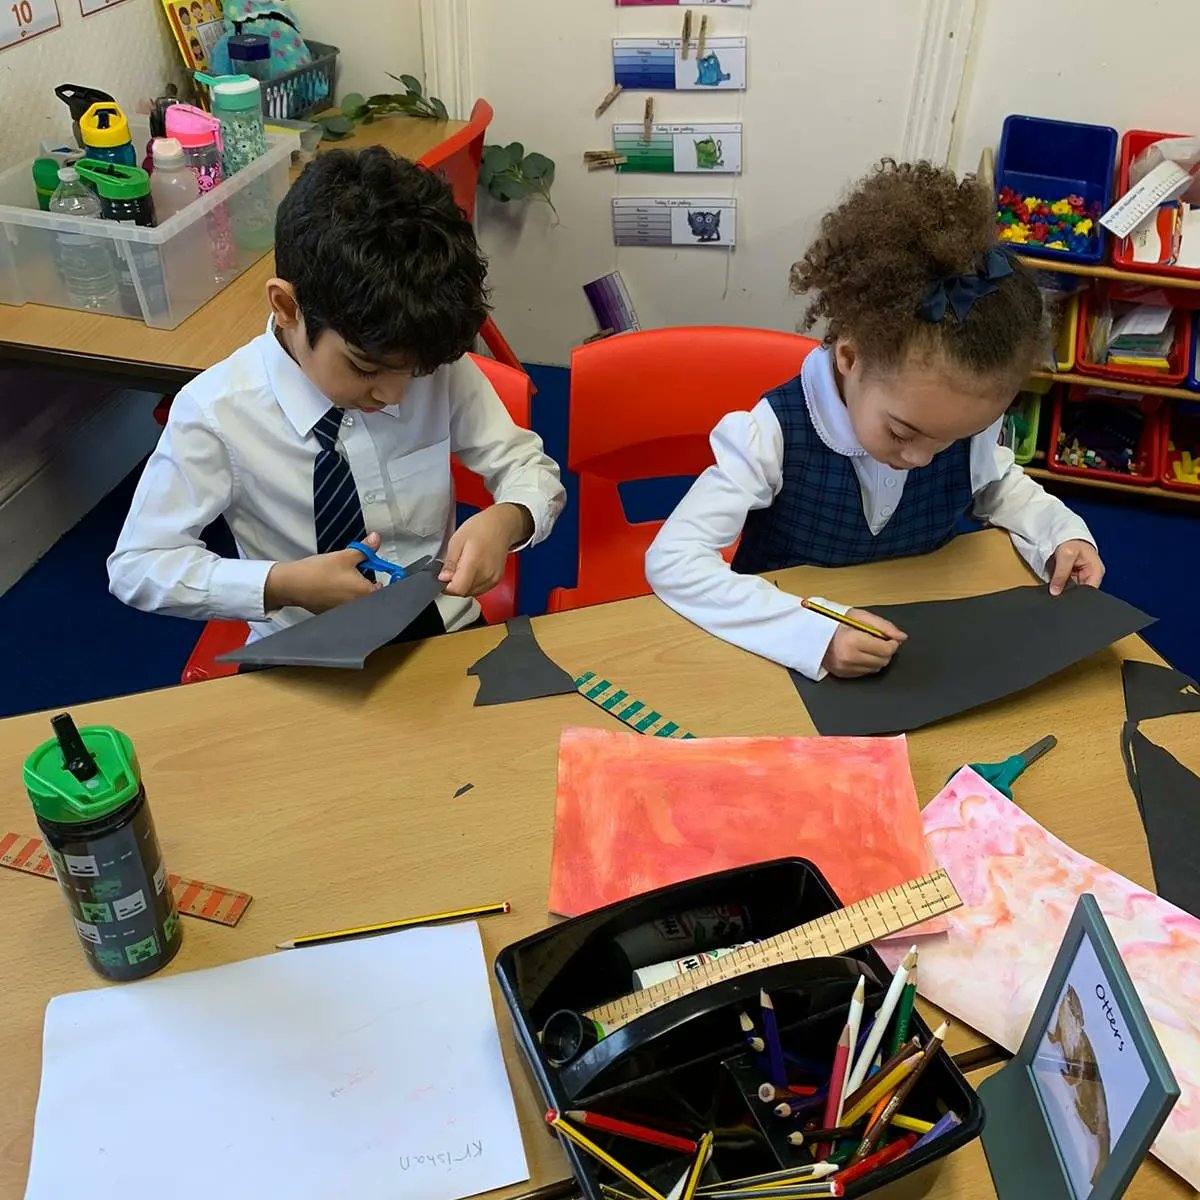 Year 1 have been learning about The Great Fire of London. They used watercolours to create their ‘fire’ backgrounds & then carefully drew a Tudor skyline of London. They chose churches, bridges & houses, then cut them out & stuck them on. They were so proud of their silhouettes.